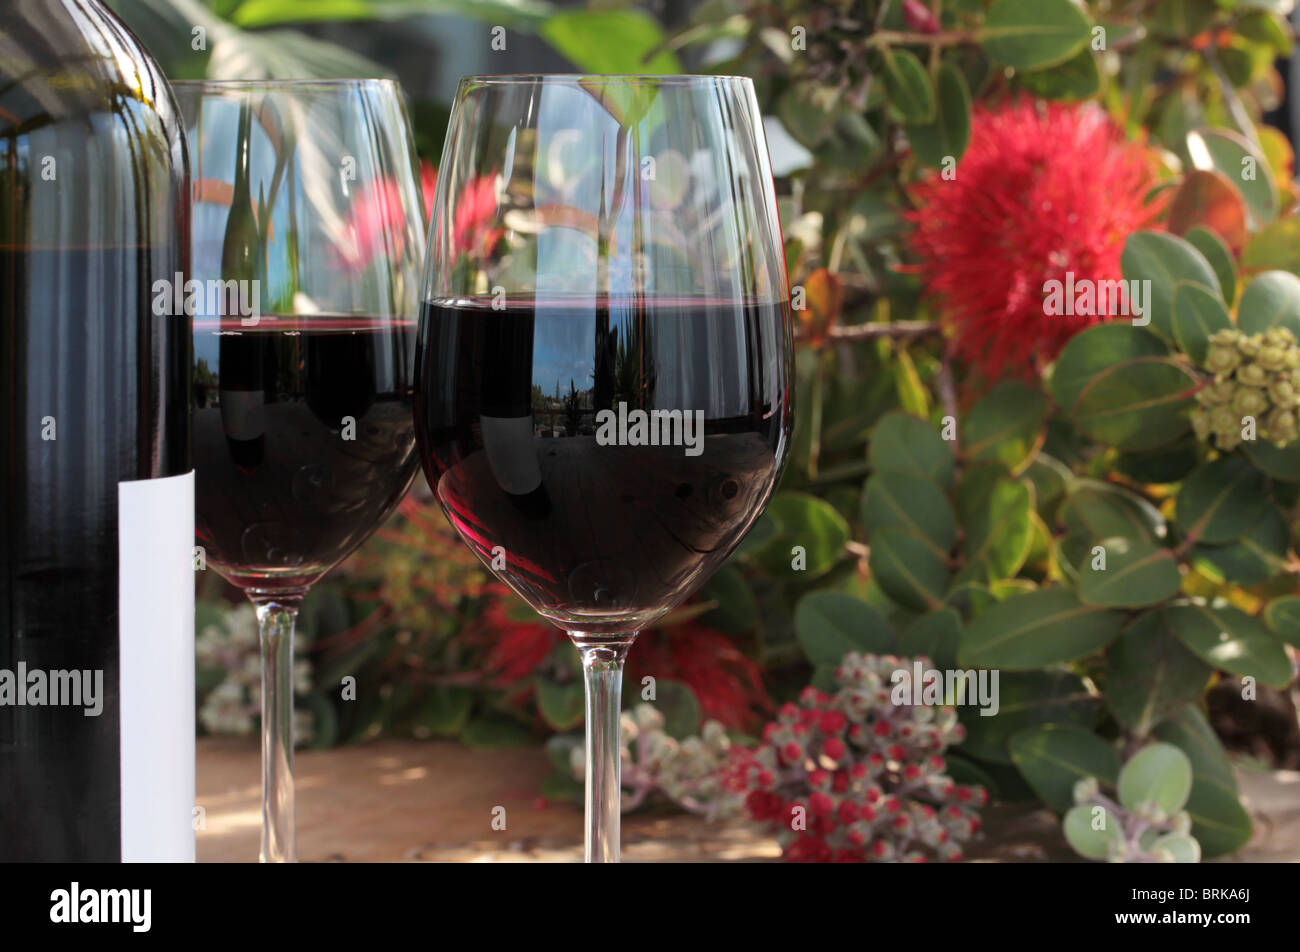 Bottle & Glasses of Red Wine on Outdoor Table with Pohutukawa Flowers Stock Photo